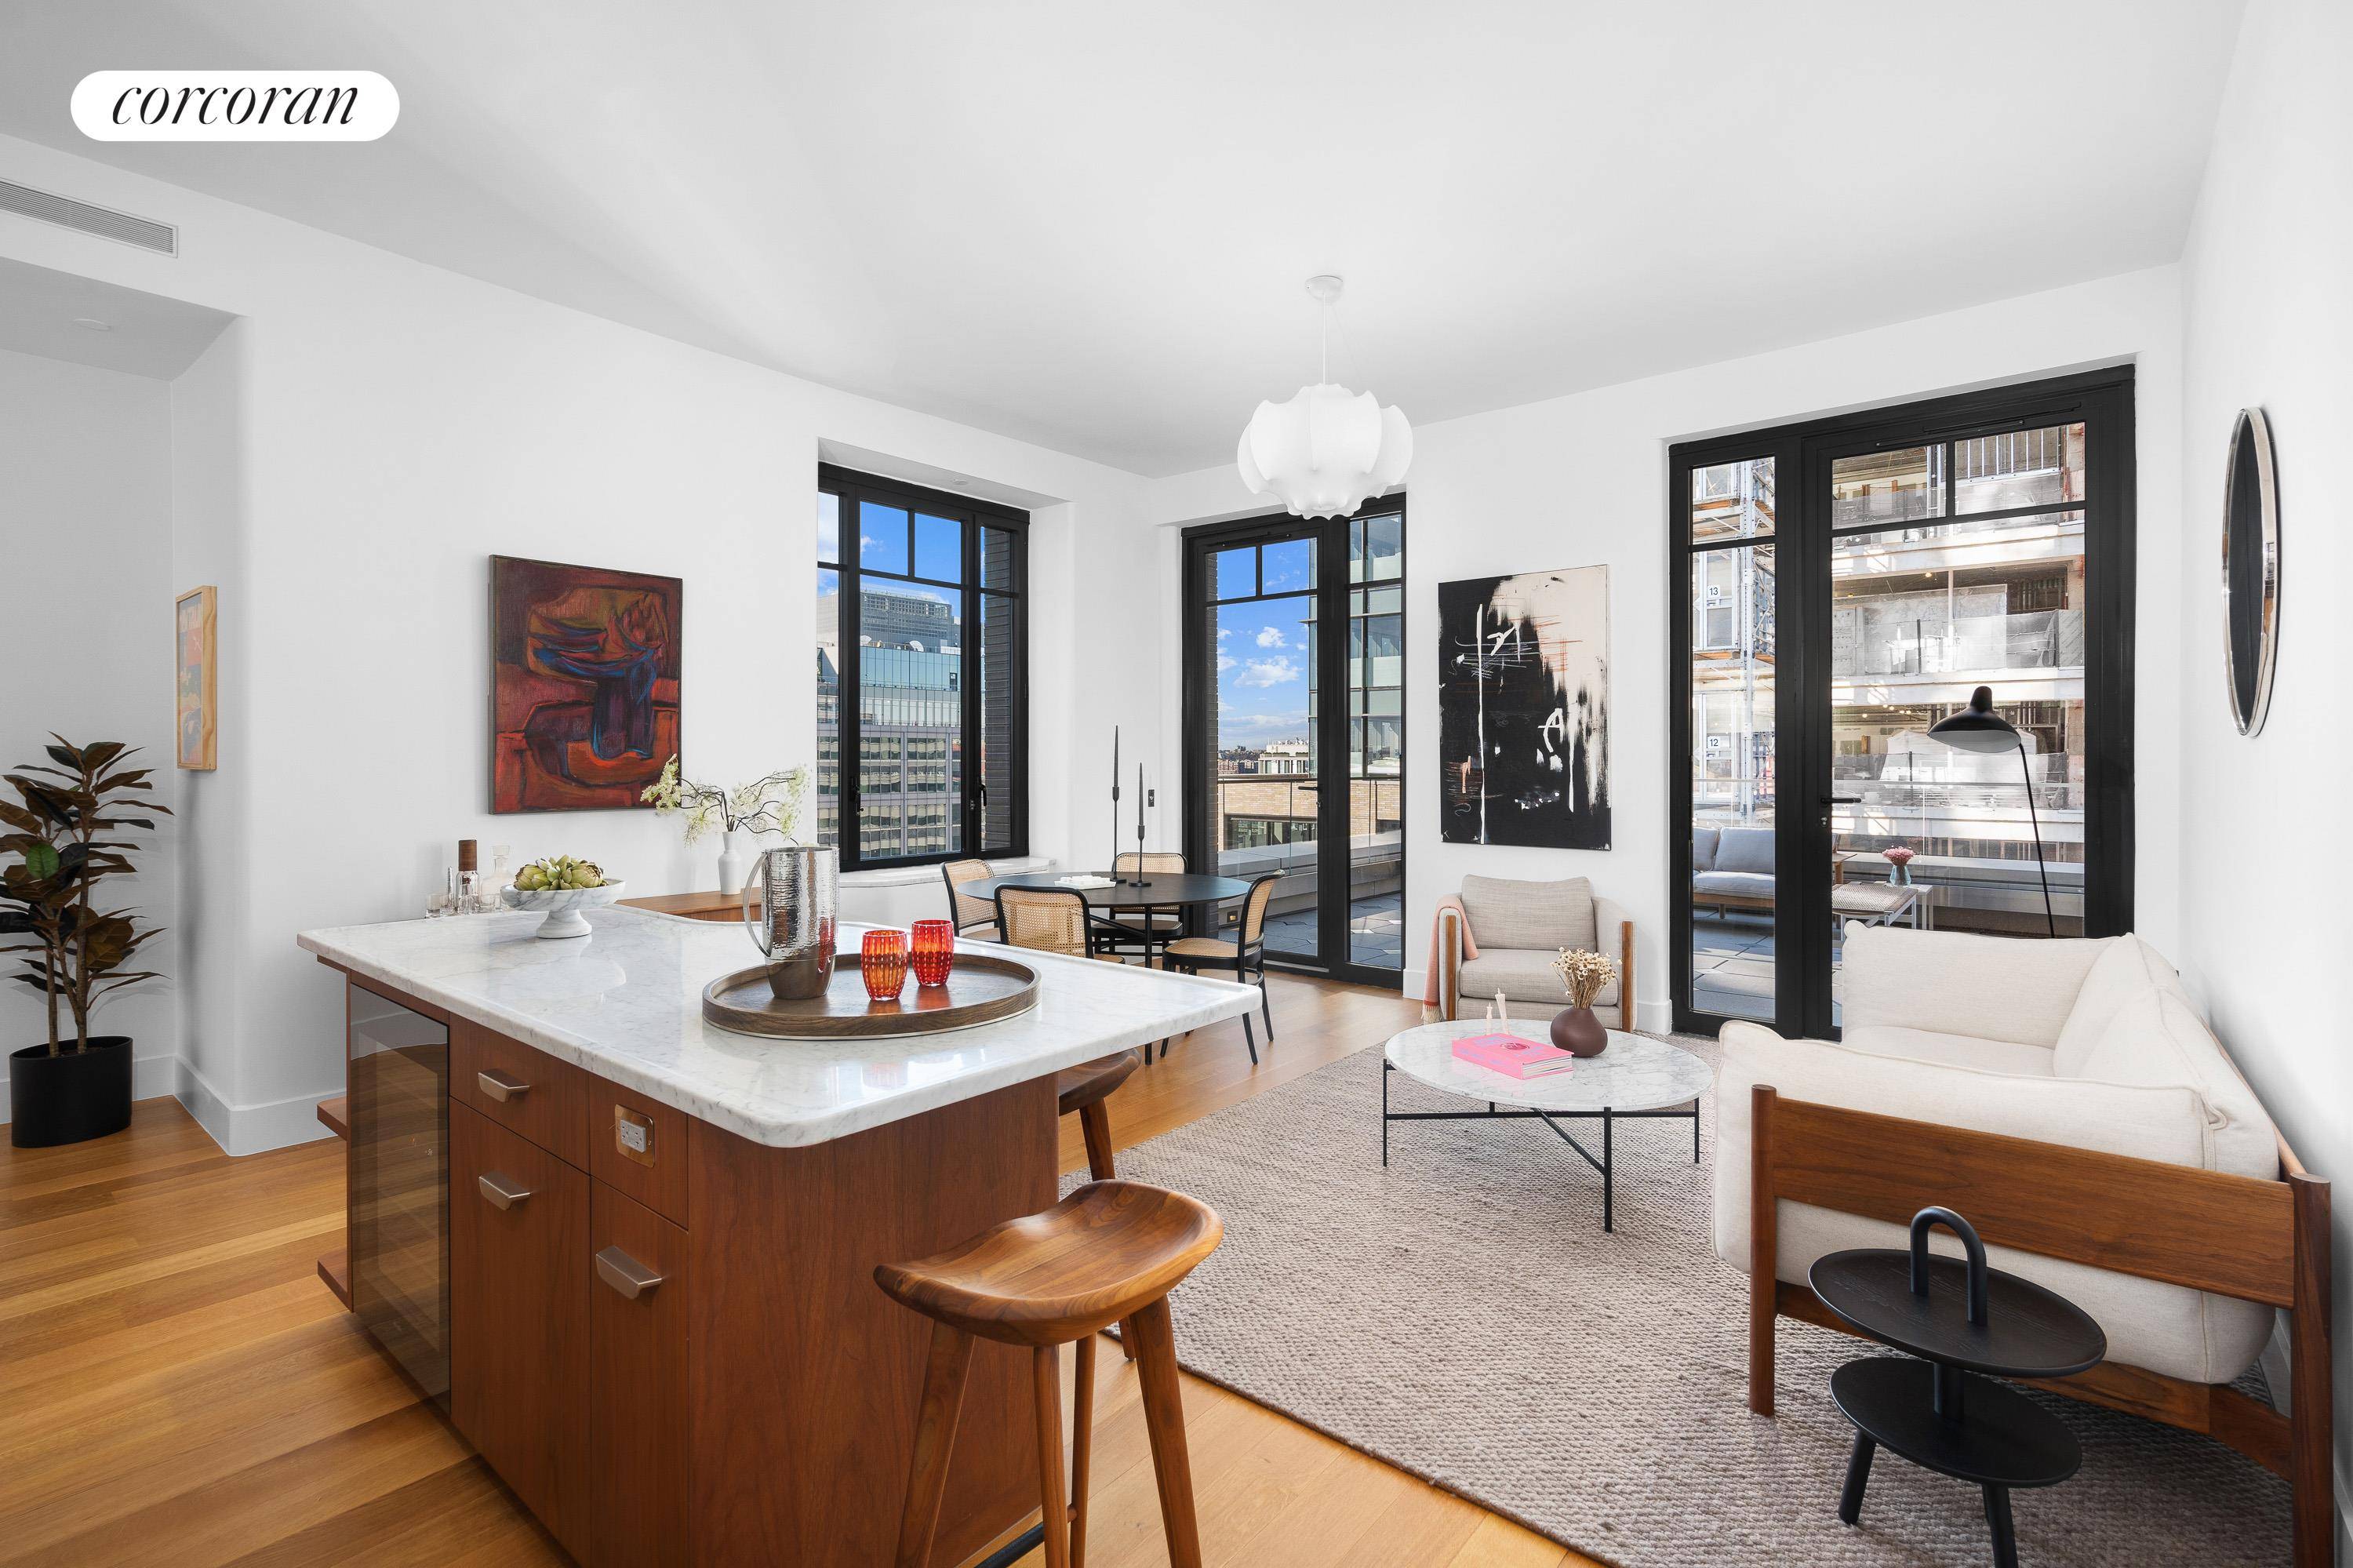 Over 80 Sold ! Residence 18D at Greenwich West is an exceptional three bedroom two and a half bathroom condominium home which offers South, East, and North exposures with Hudson ...